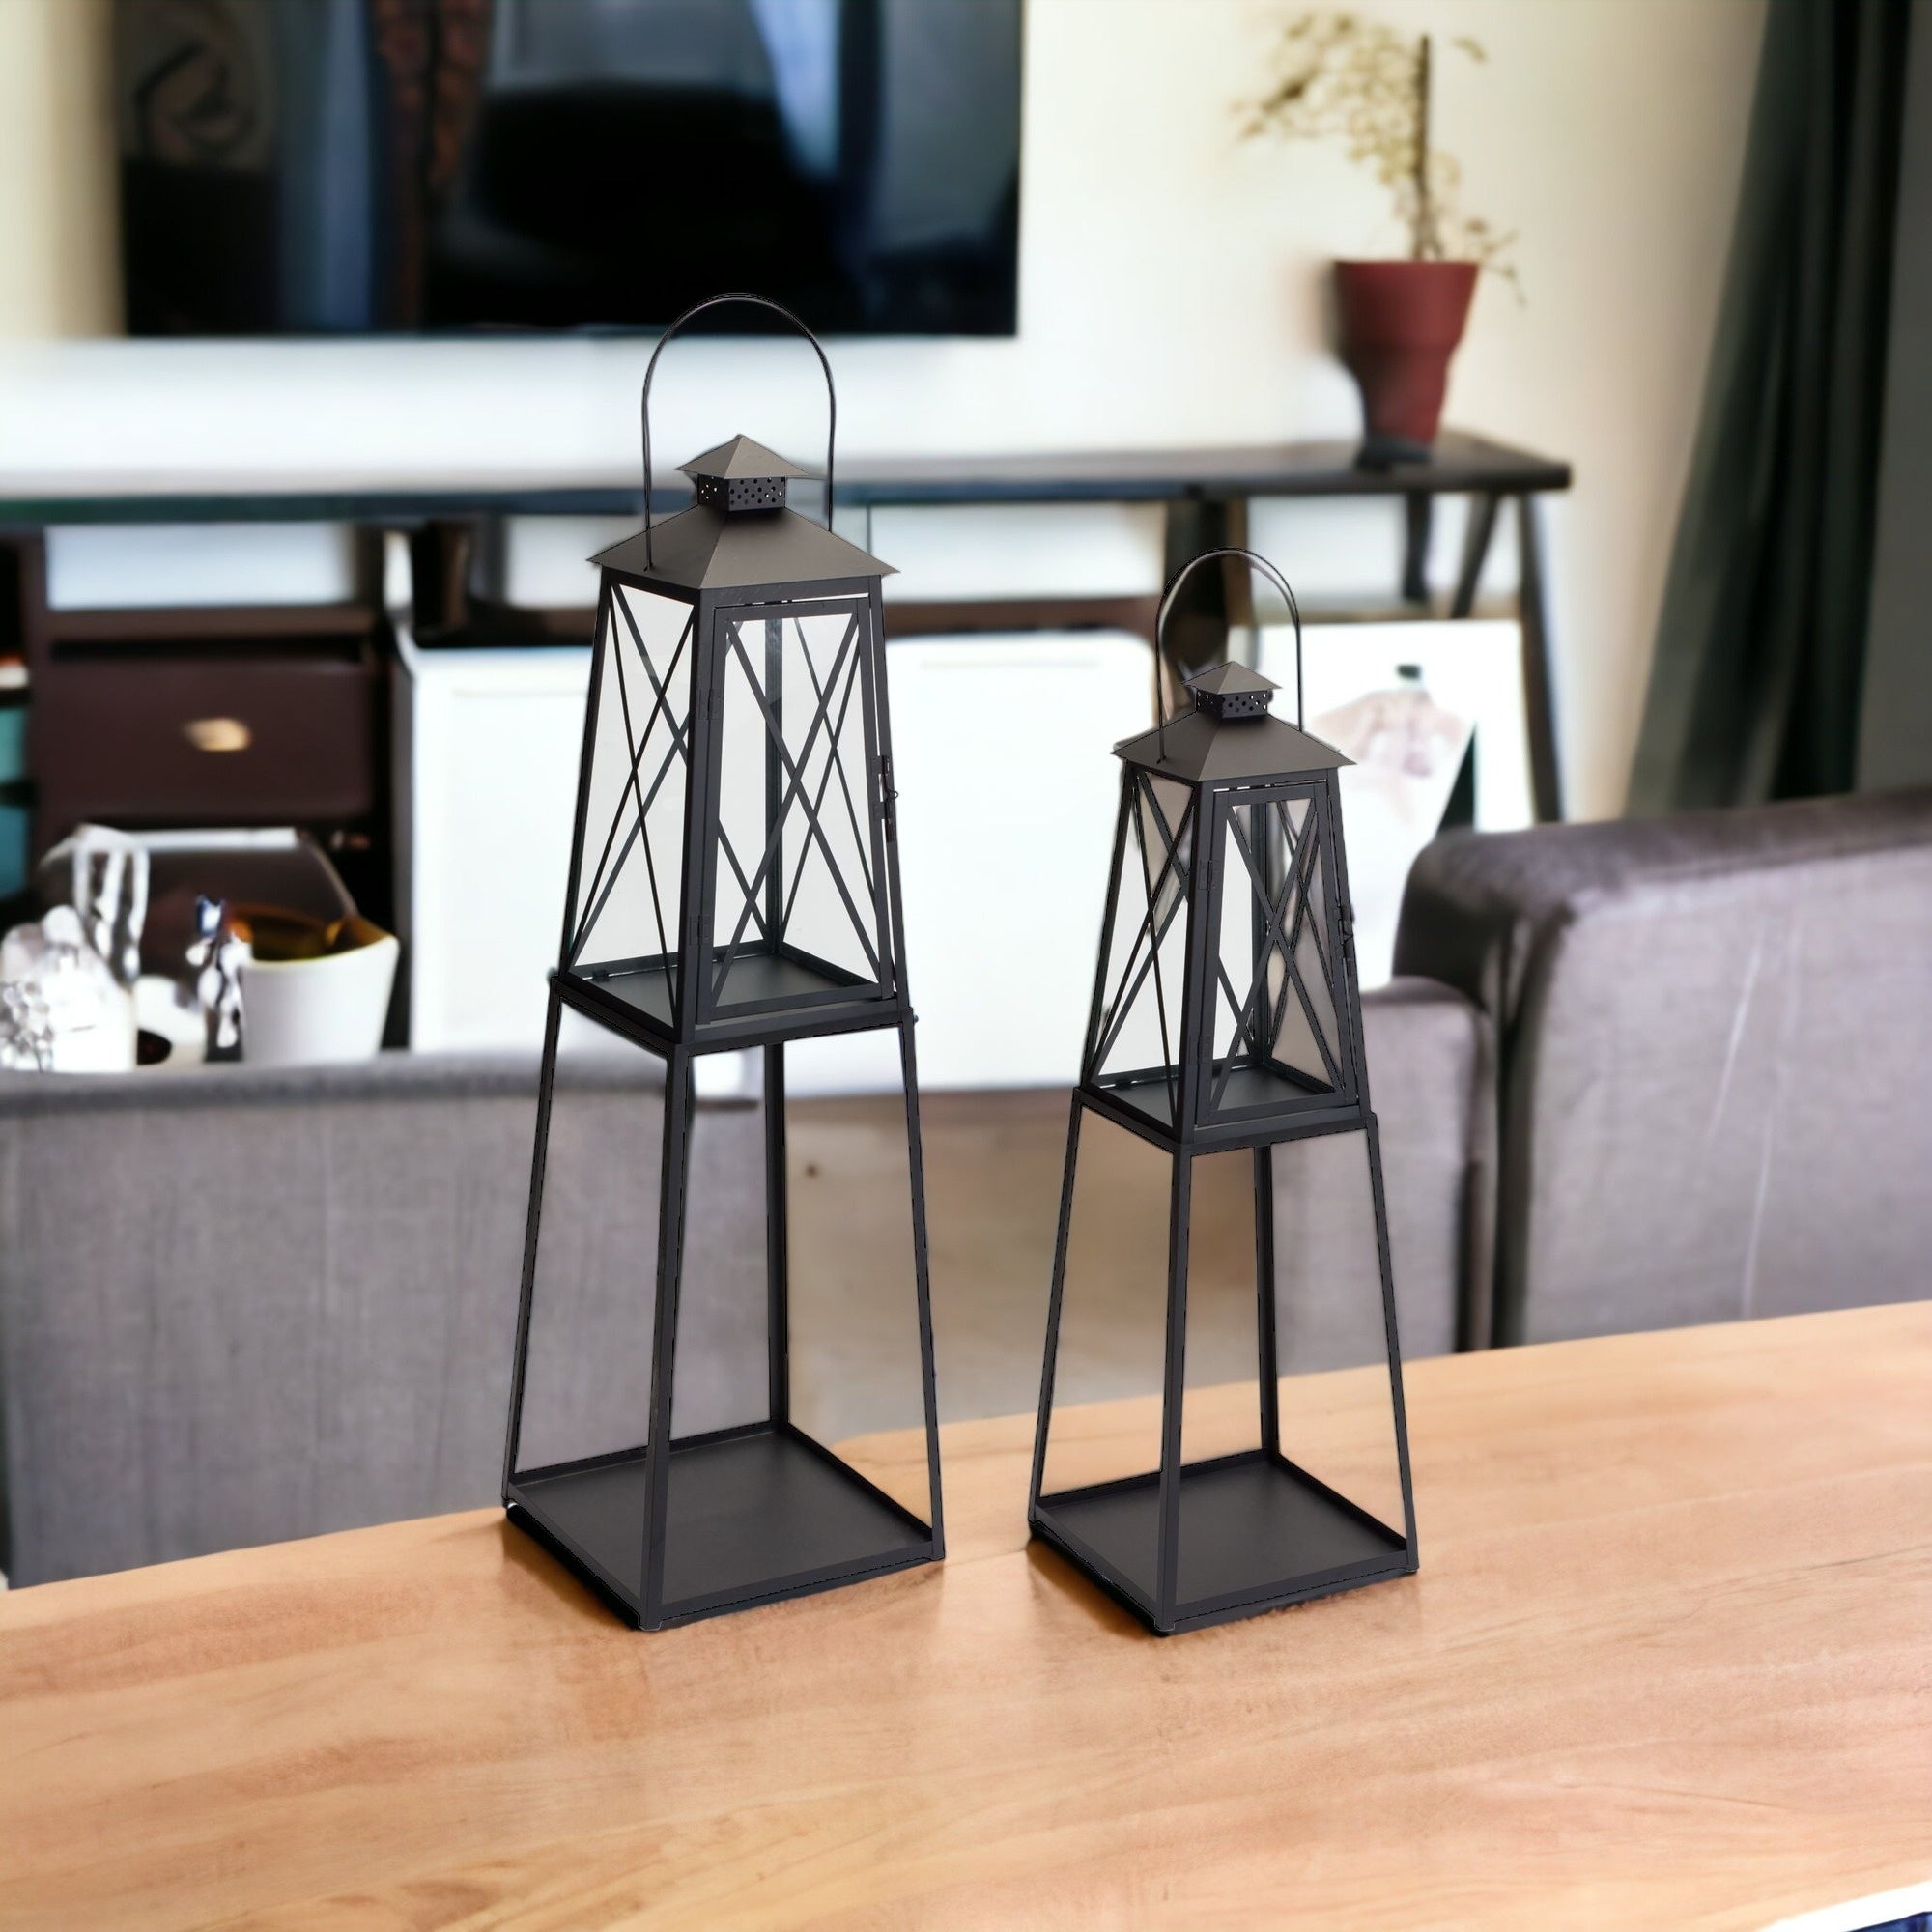 Set of Two Black Iron Ornate Tabletop Lantern Candle Holders